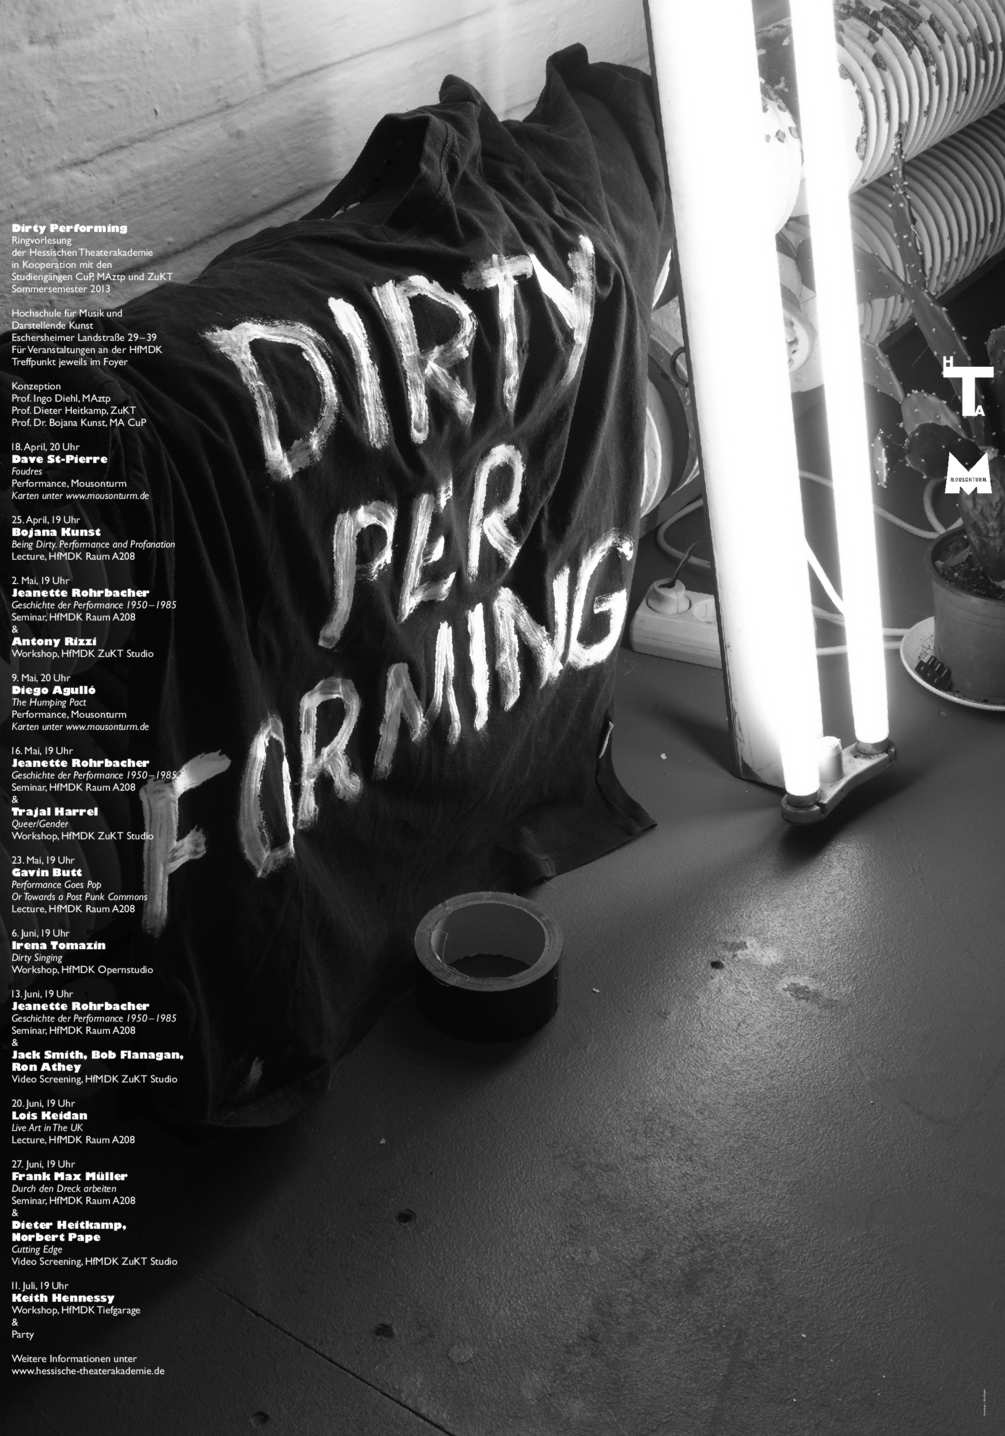 dirty-performing-poster-1005x1436px